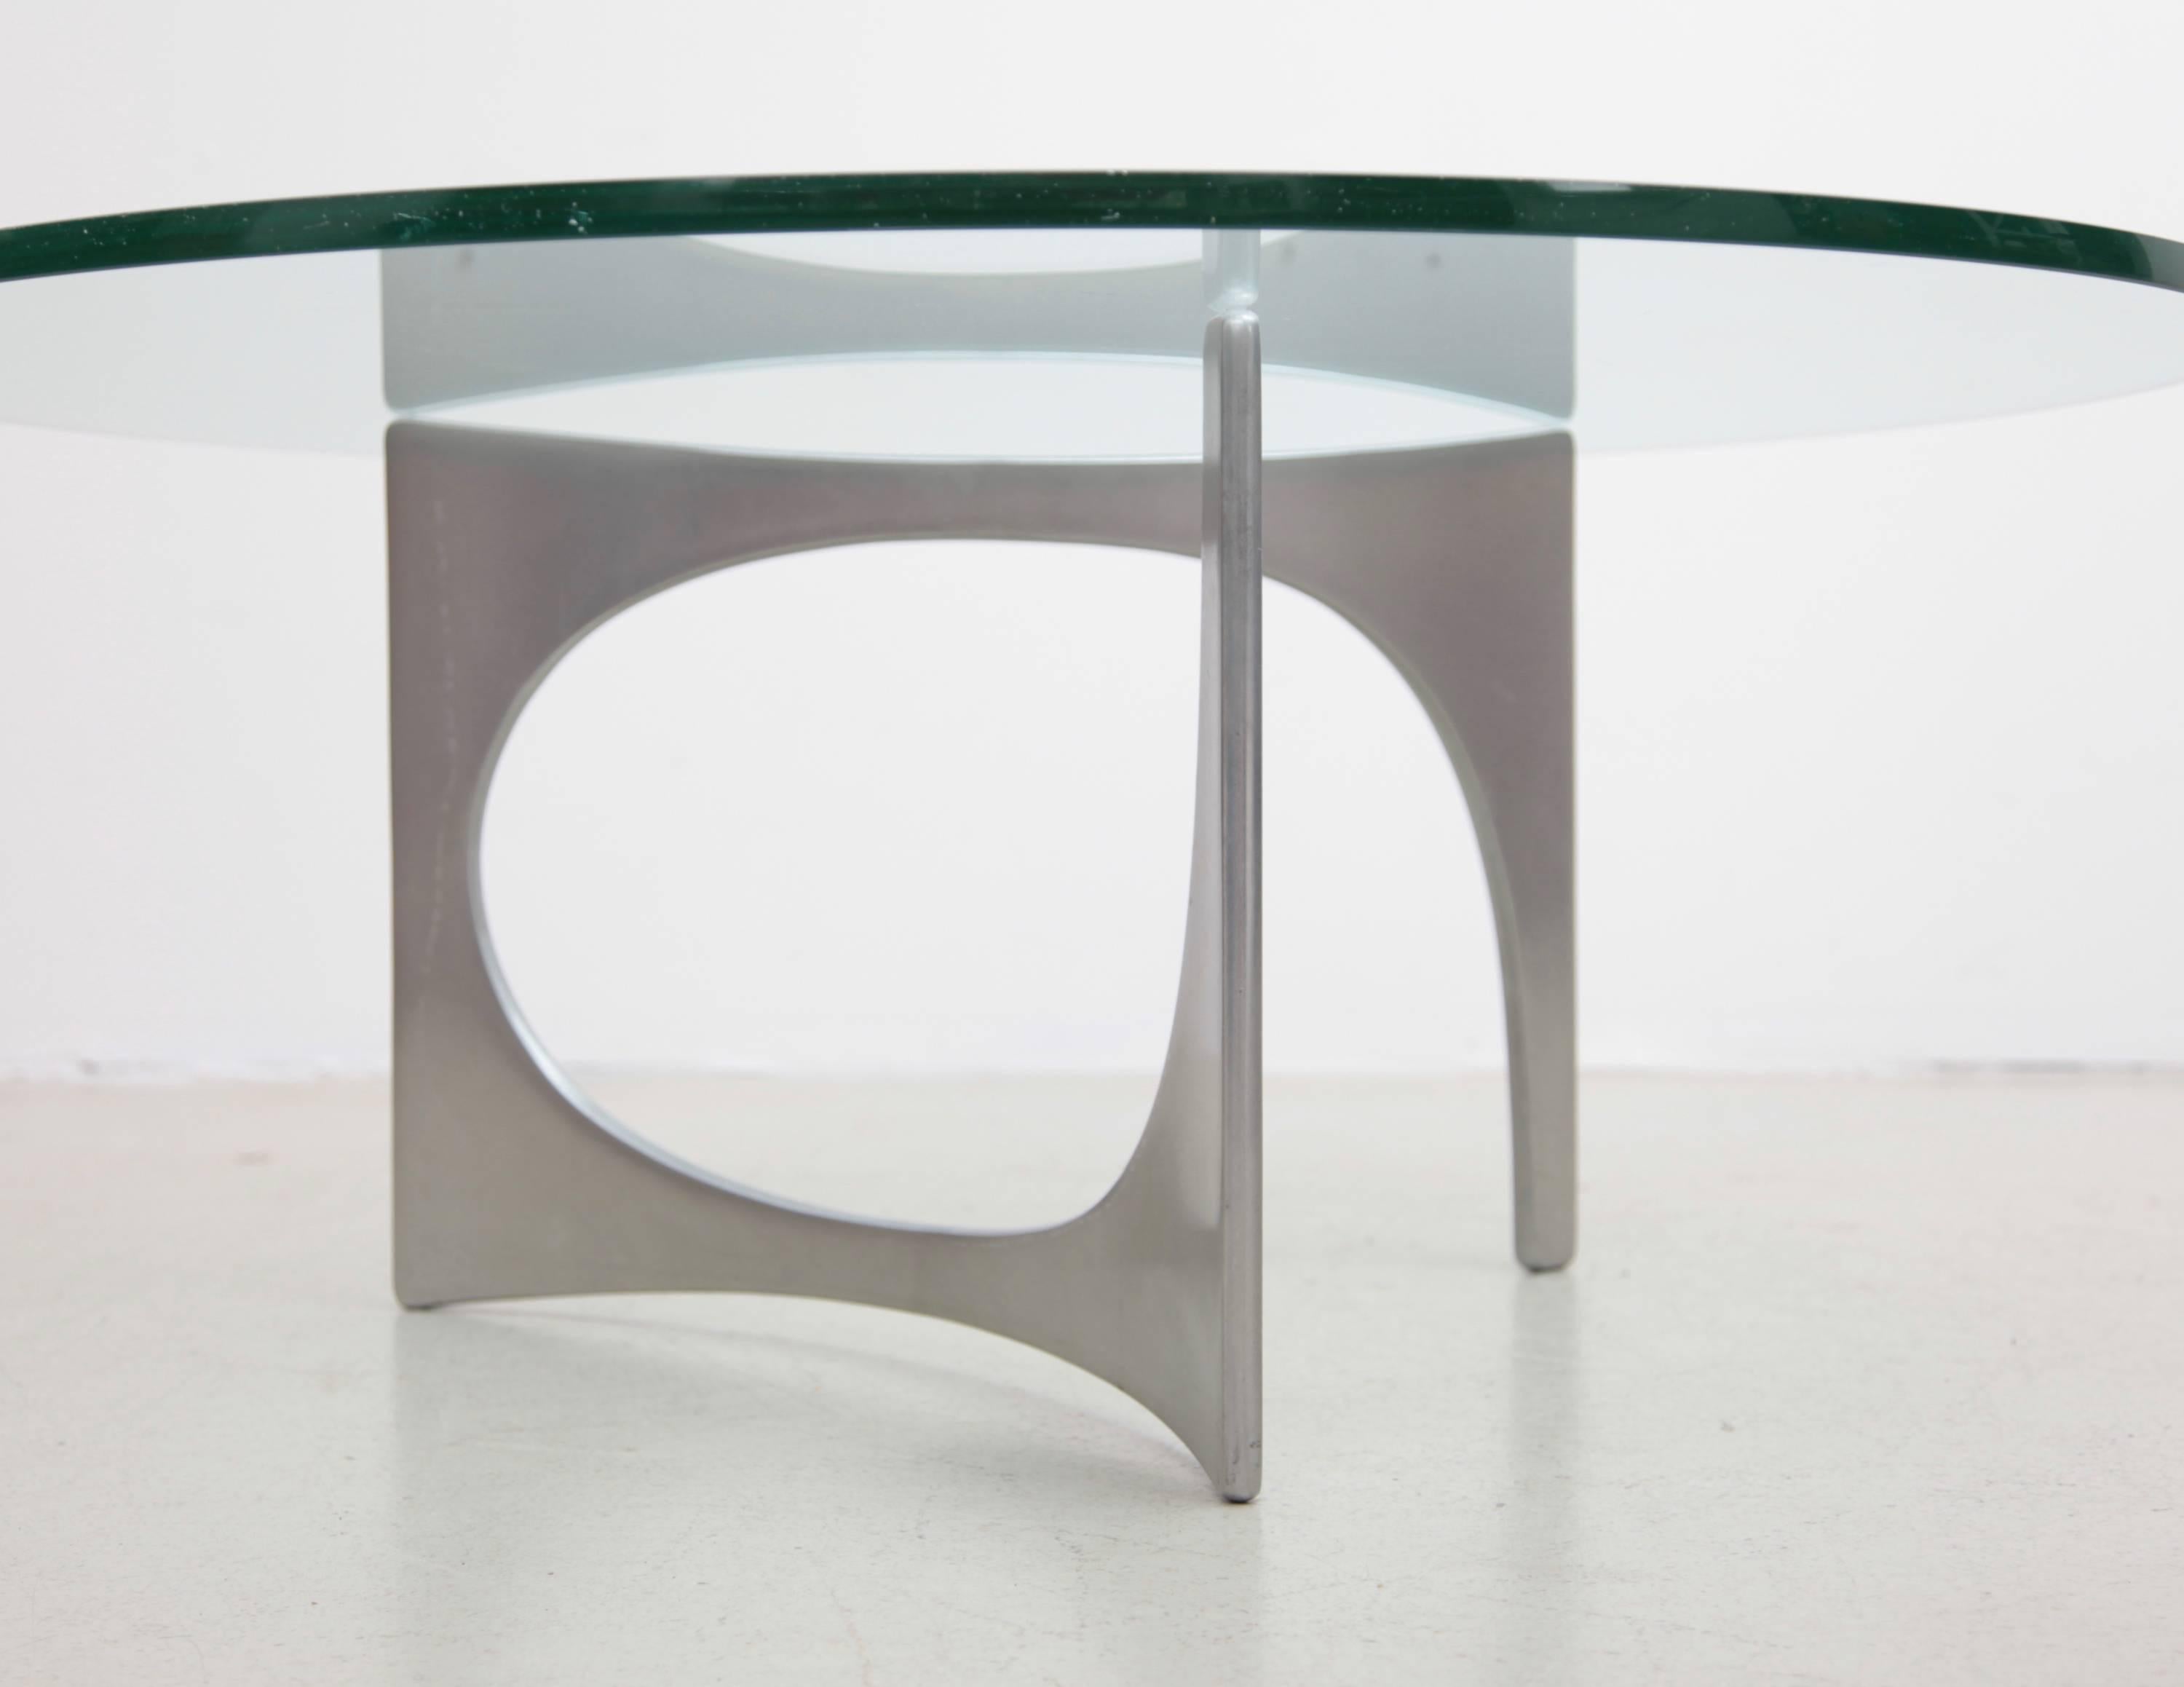 Very nice coffee or cocktail table made of aluminum. The table was designed by Knut Hesterberg for German manufacturer Ronald Schmitt.

